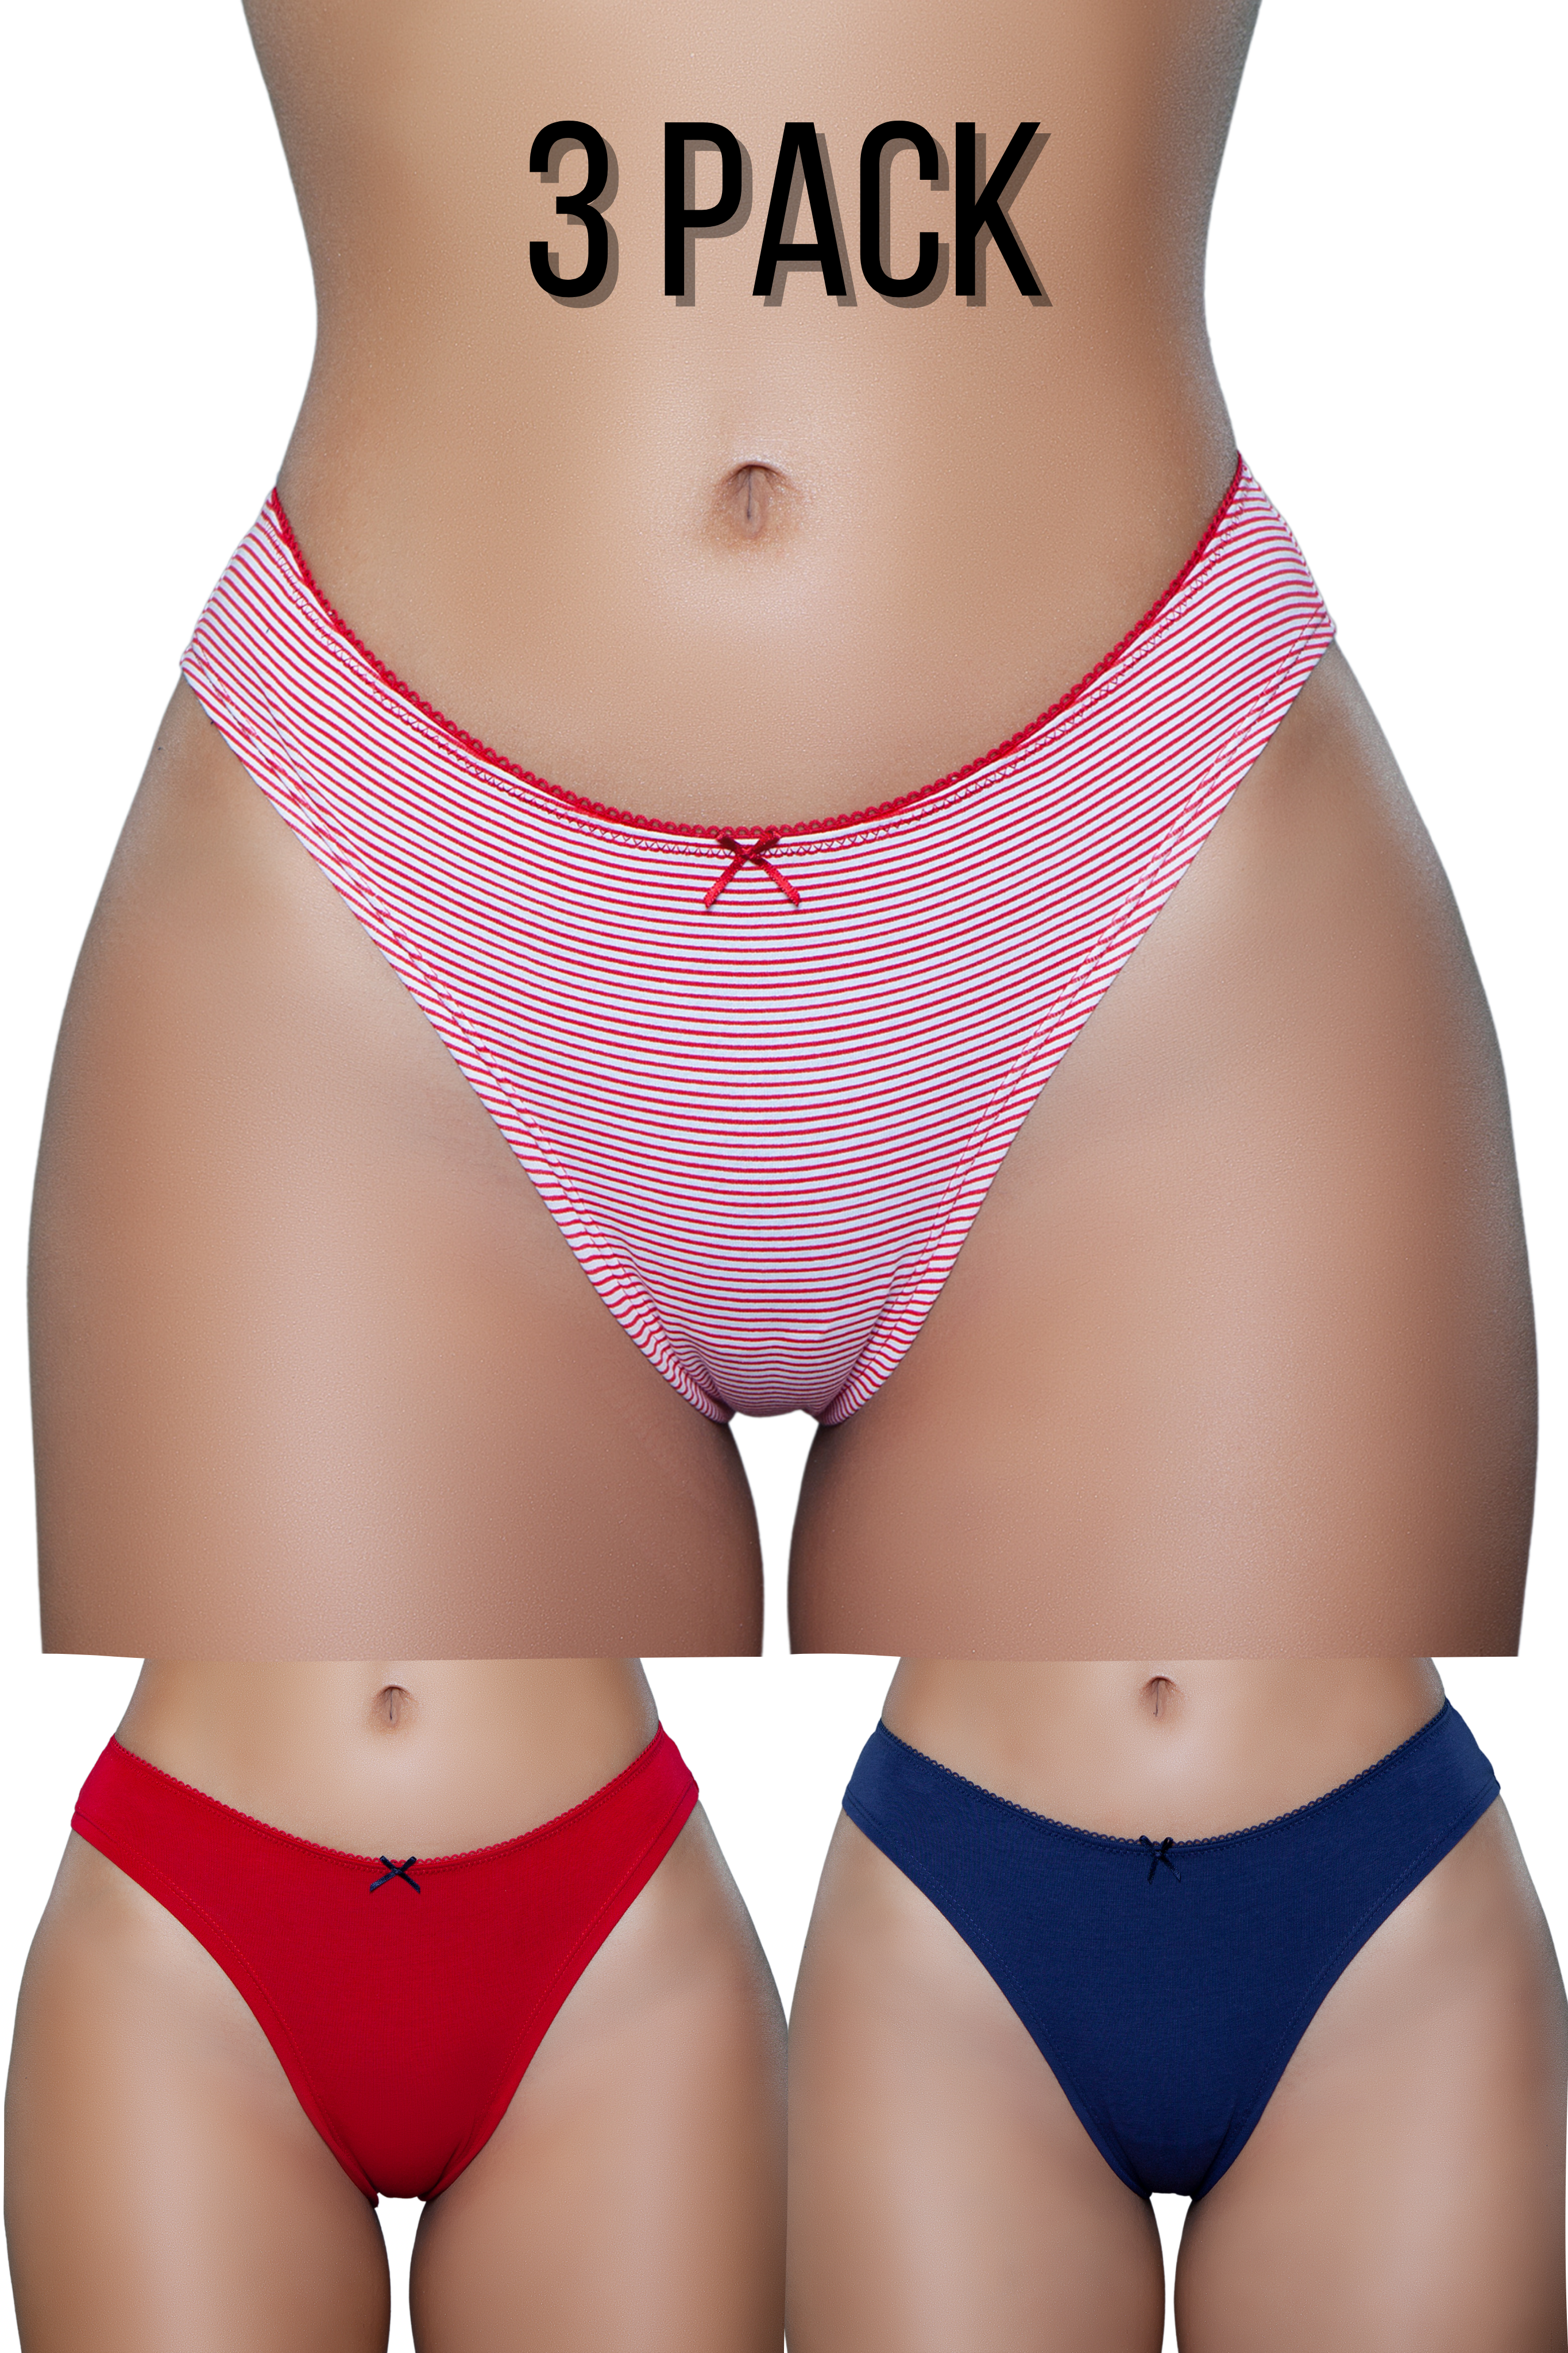 3pc. Low-Rise Jersey Knit Brief Panties